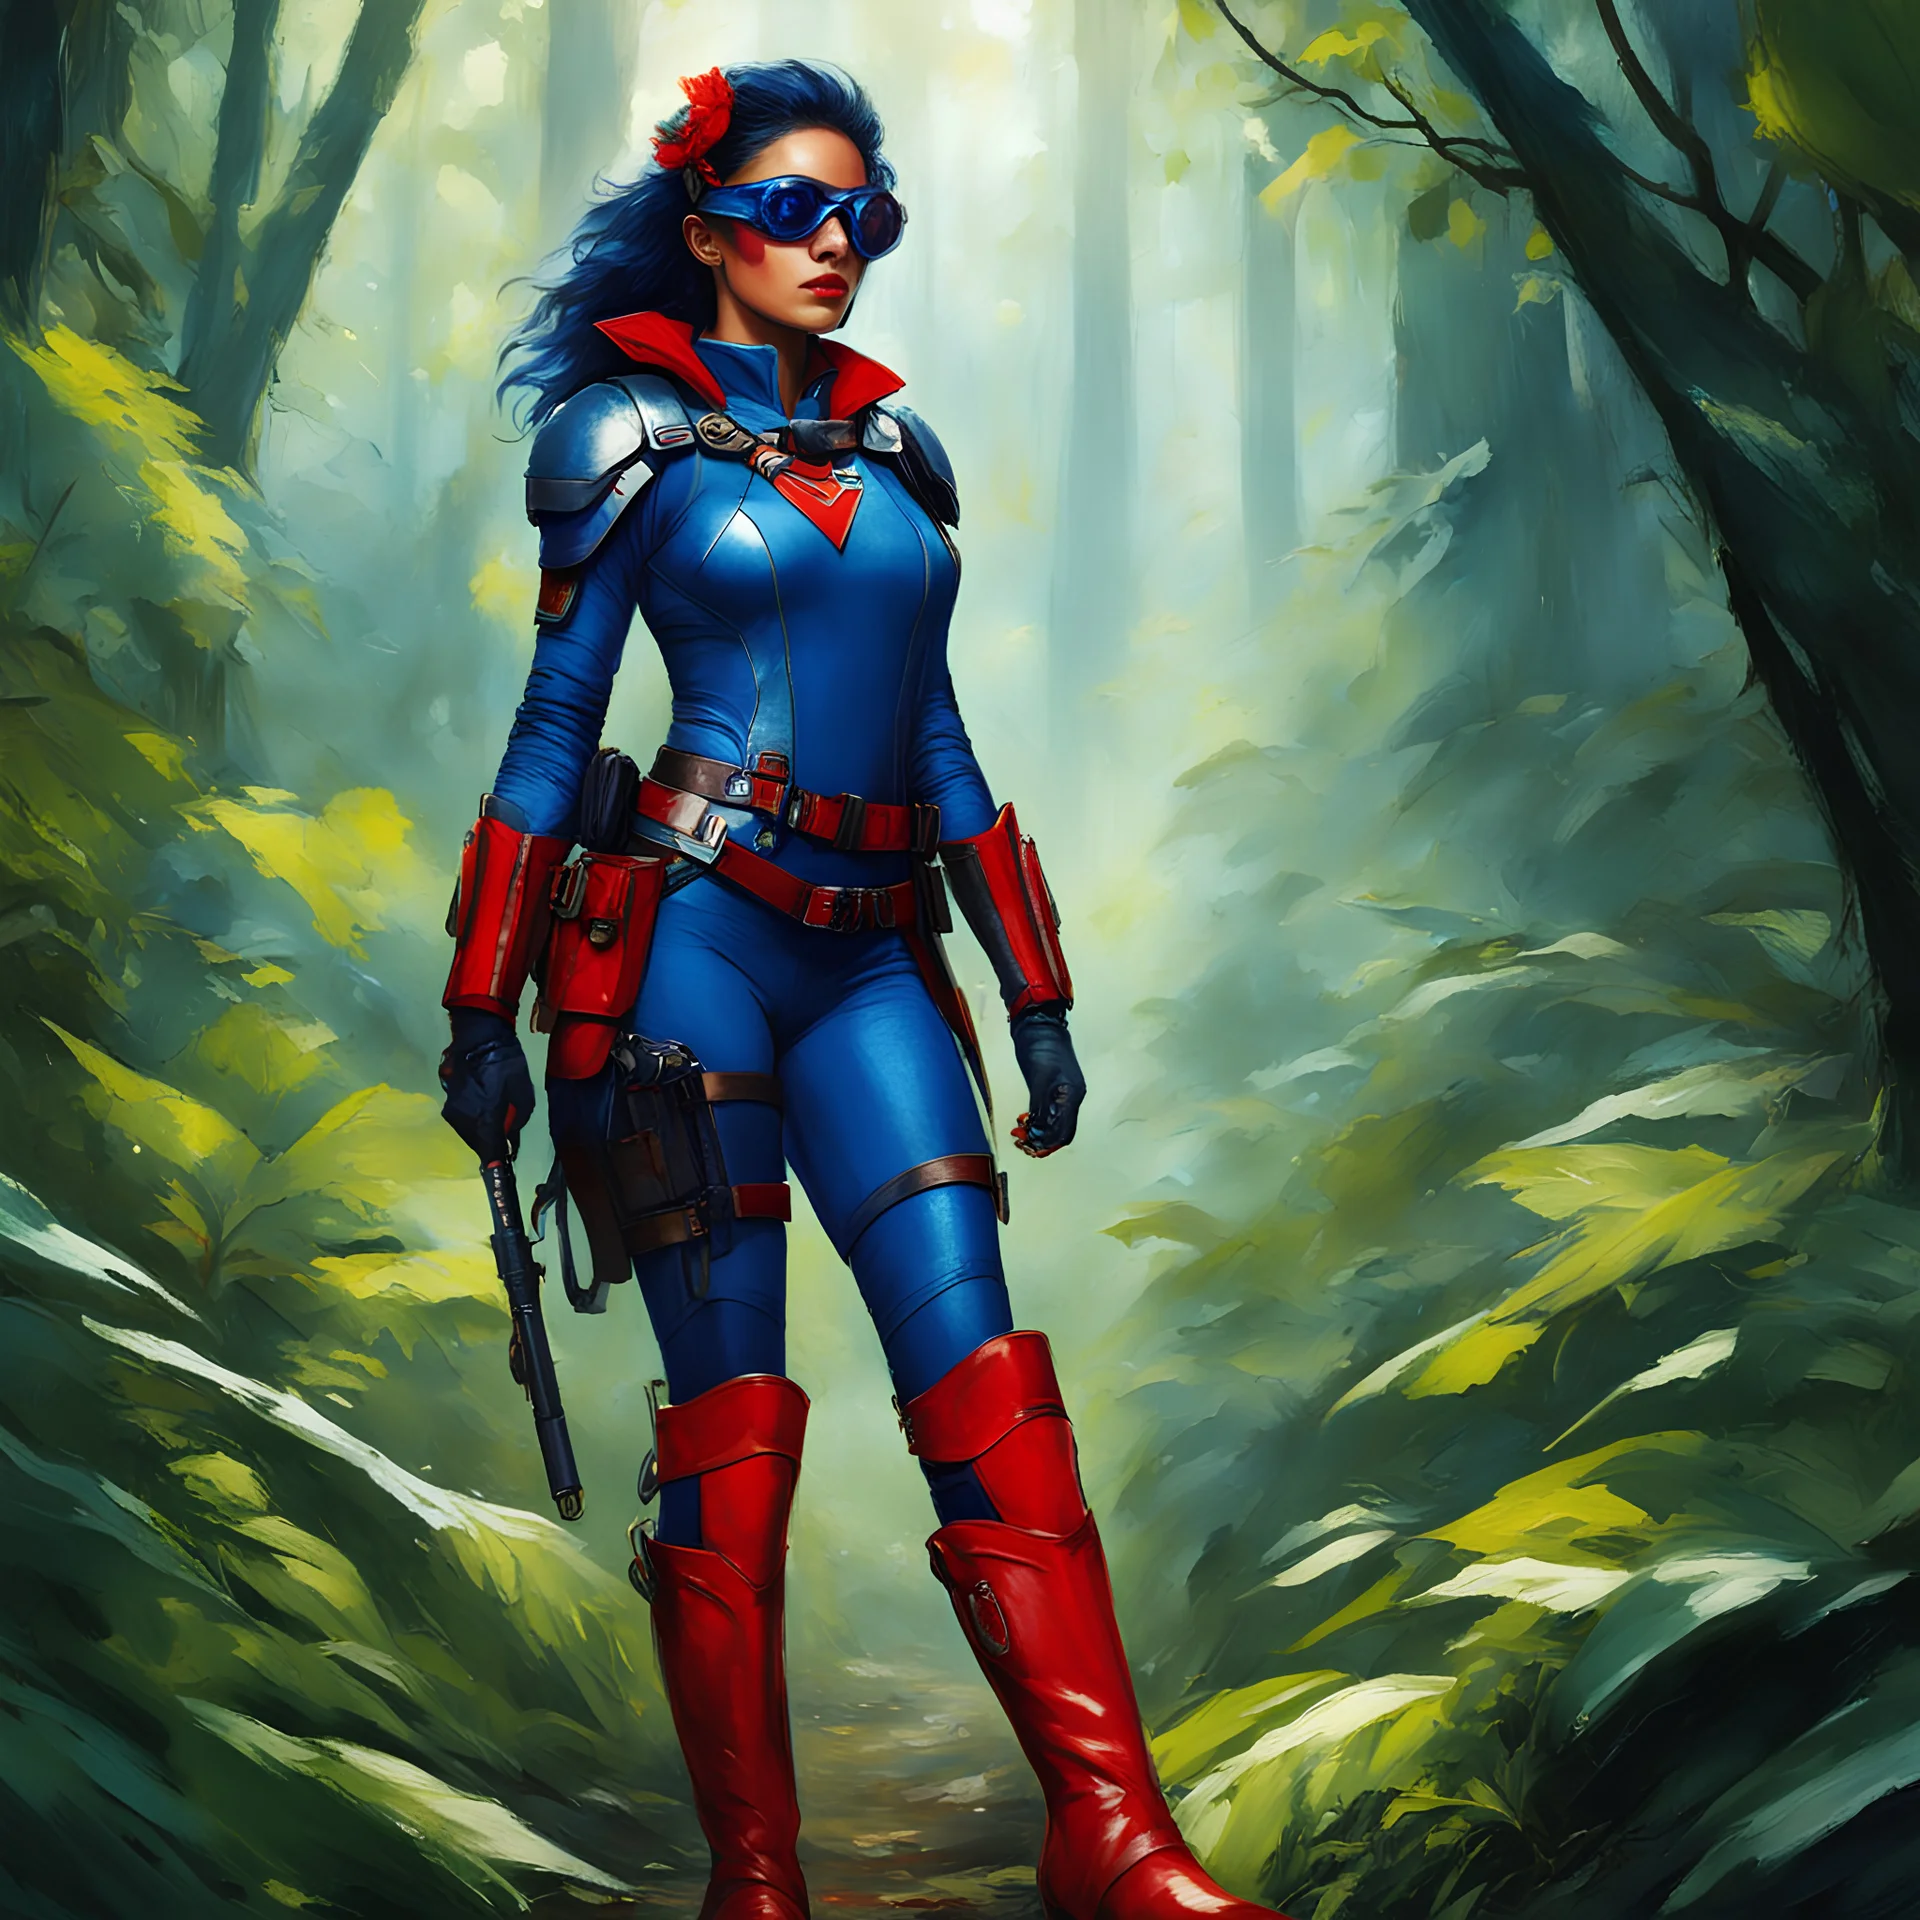 Her blue skin shimmers under the dappled sunlight, blending seamlessly with her surroundings. Those red boots, though, they stand out like a fiery declaration of her indomitable spirit. Equipped with her trusty goggles, she scans the jungle with hawk-like precision. Her keen eyes pierce through the dense foliage, seeking out any signs of danger or opportunity. But it's not just her eyes that are sharp; those ray guns strapped to her corset are a testament to her readiness to defend herself. She'